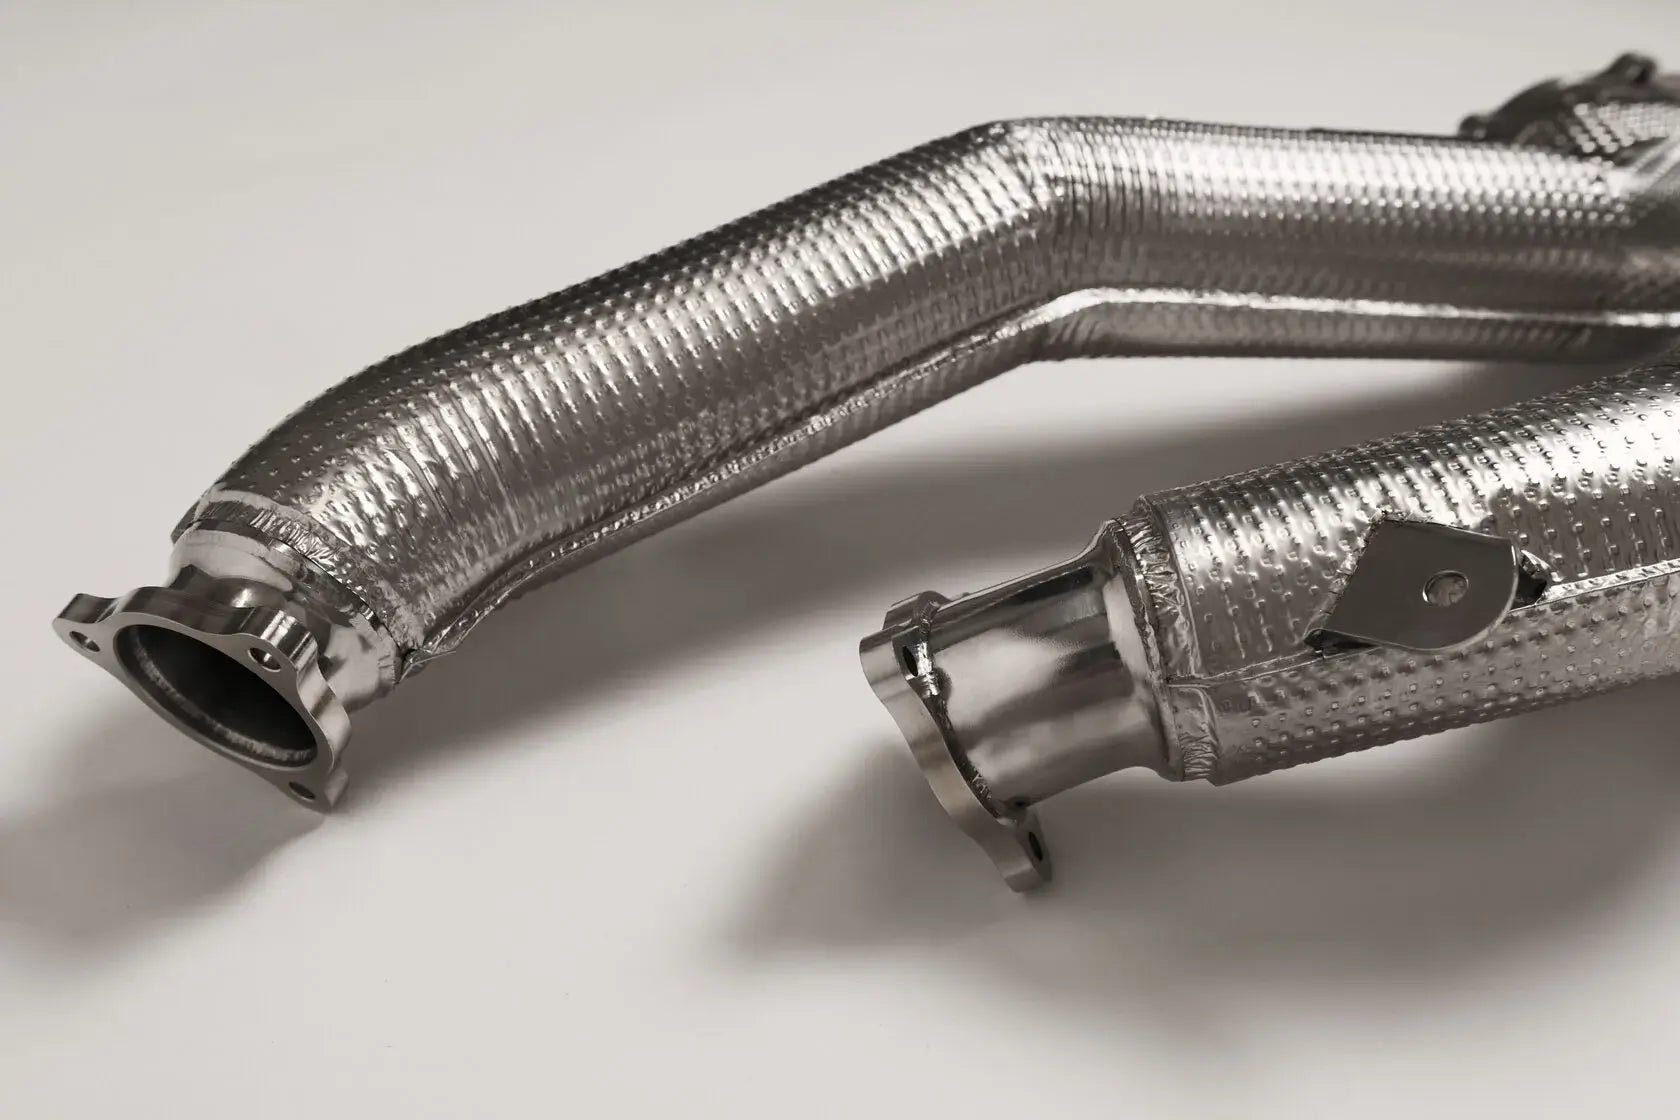 DEIKIN 10-AUDI.RS7.C7-DPT Downpipe for AUDI RS7 (C7) with thermal insulation HeatShield Photo-3 